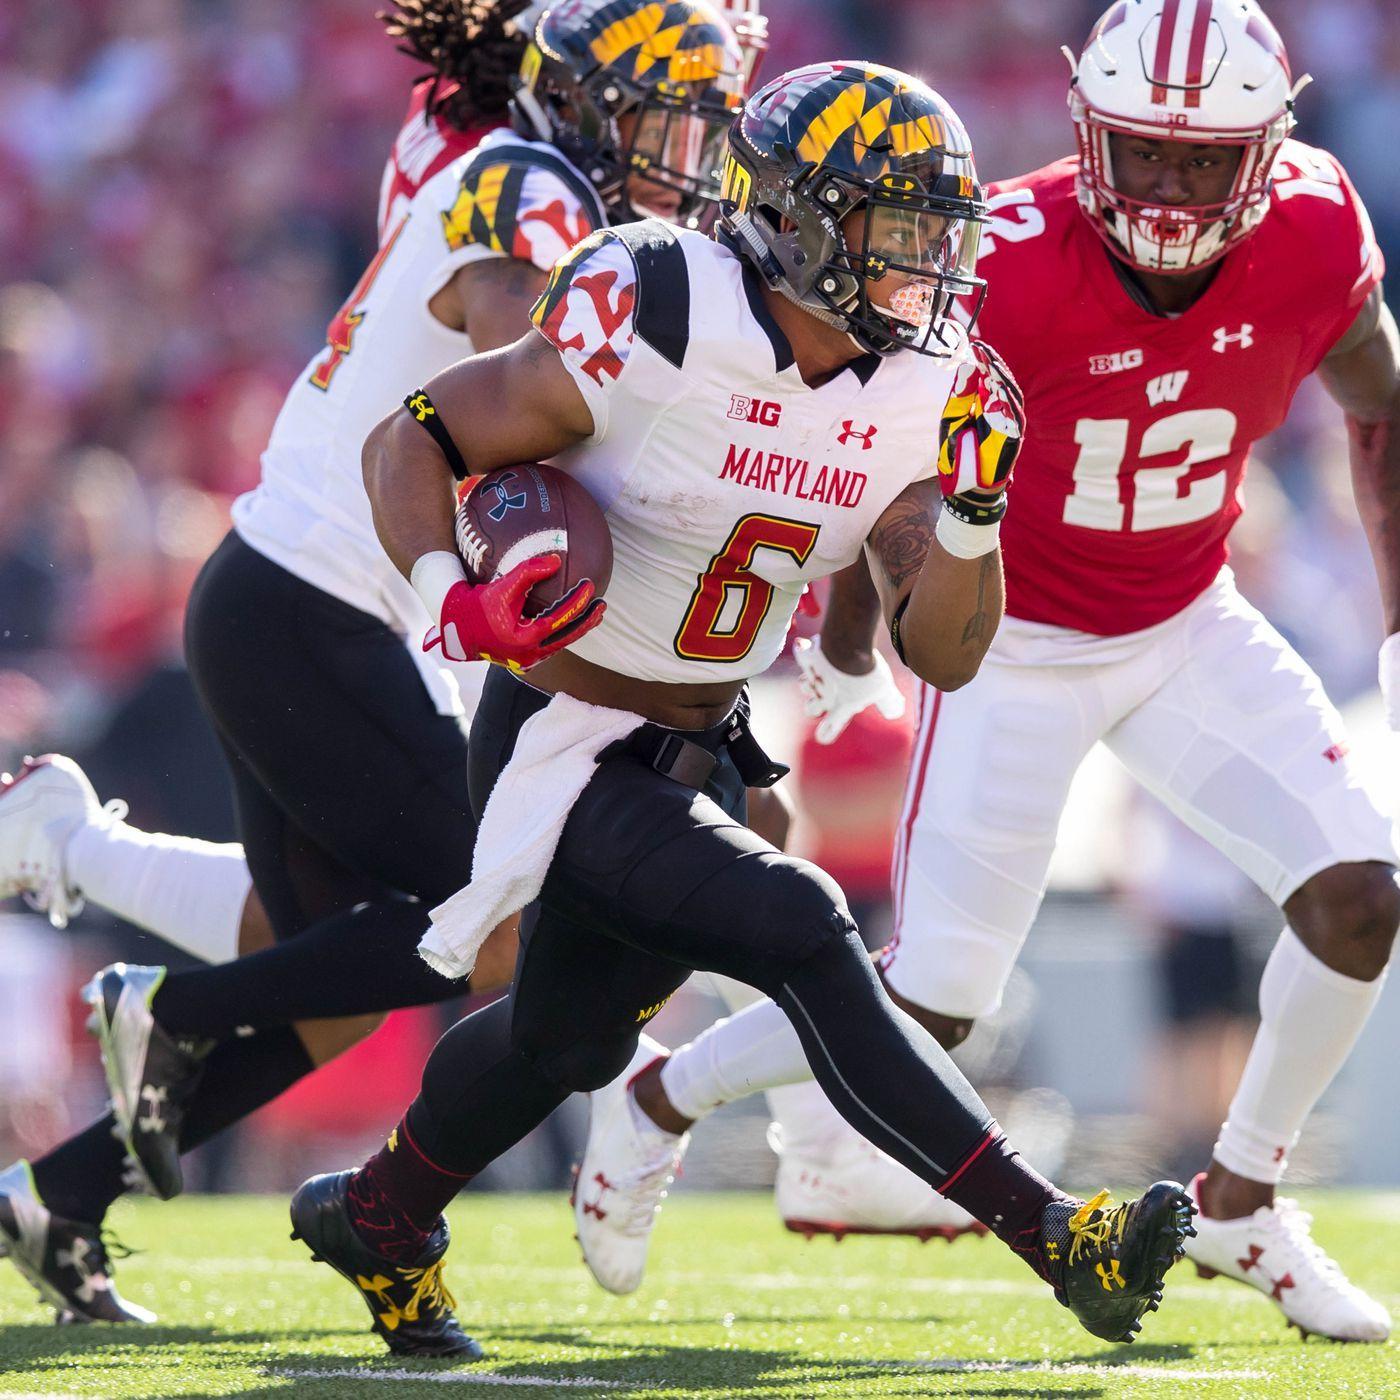 Maryland football preview 2018: Terps have talent, but